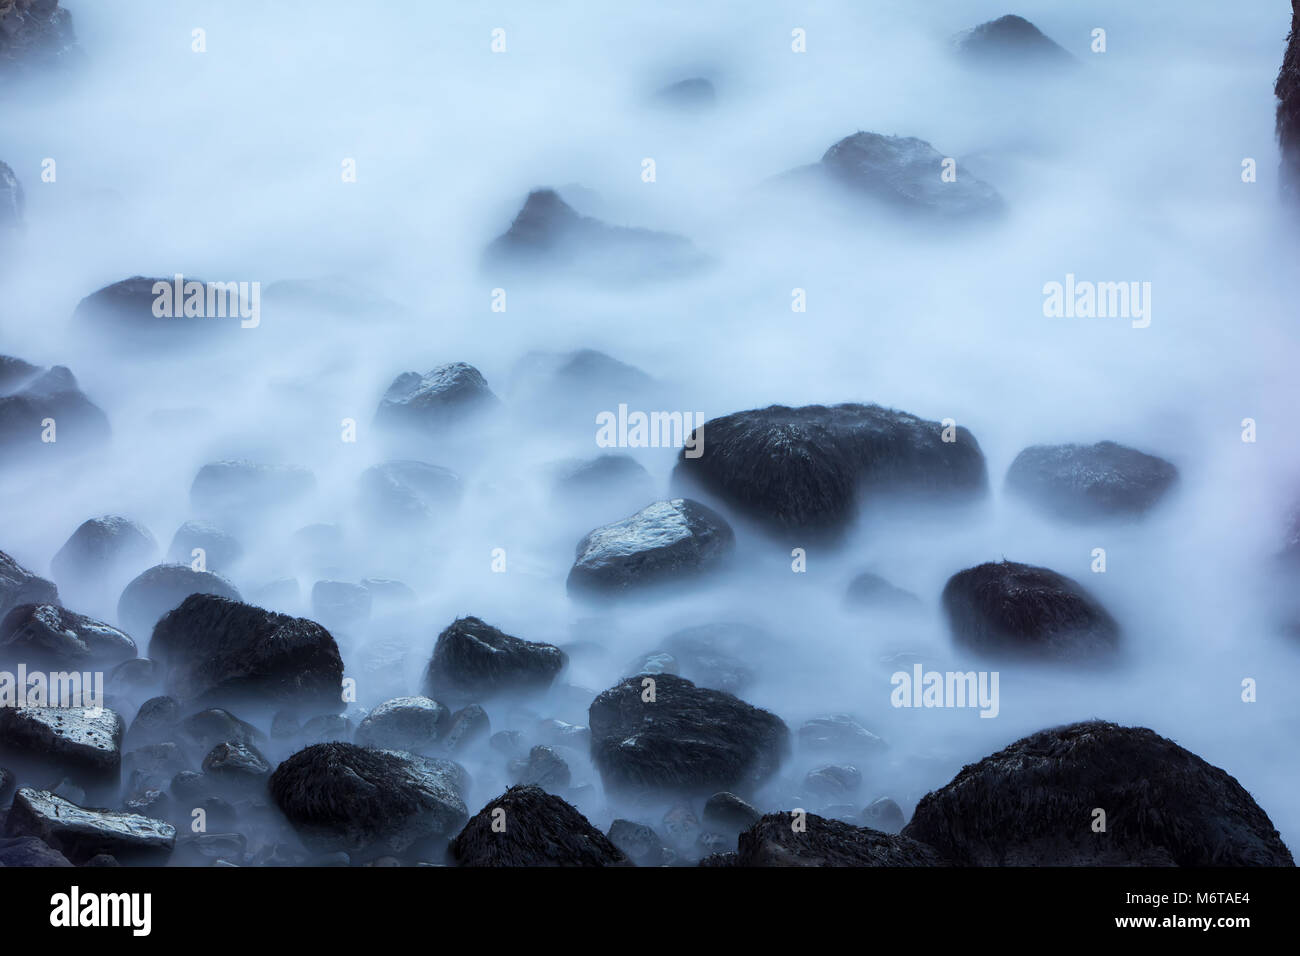 Stones in a stream with water blurred by long exposure using ND filter (Soft Focus), Iceland Stock Photo